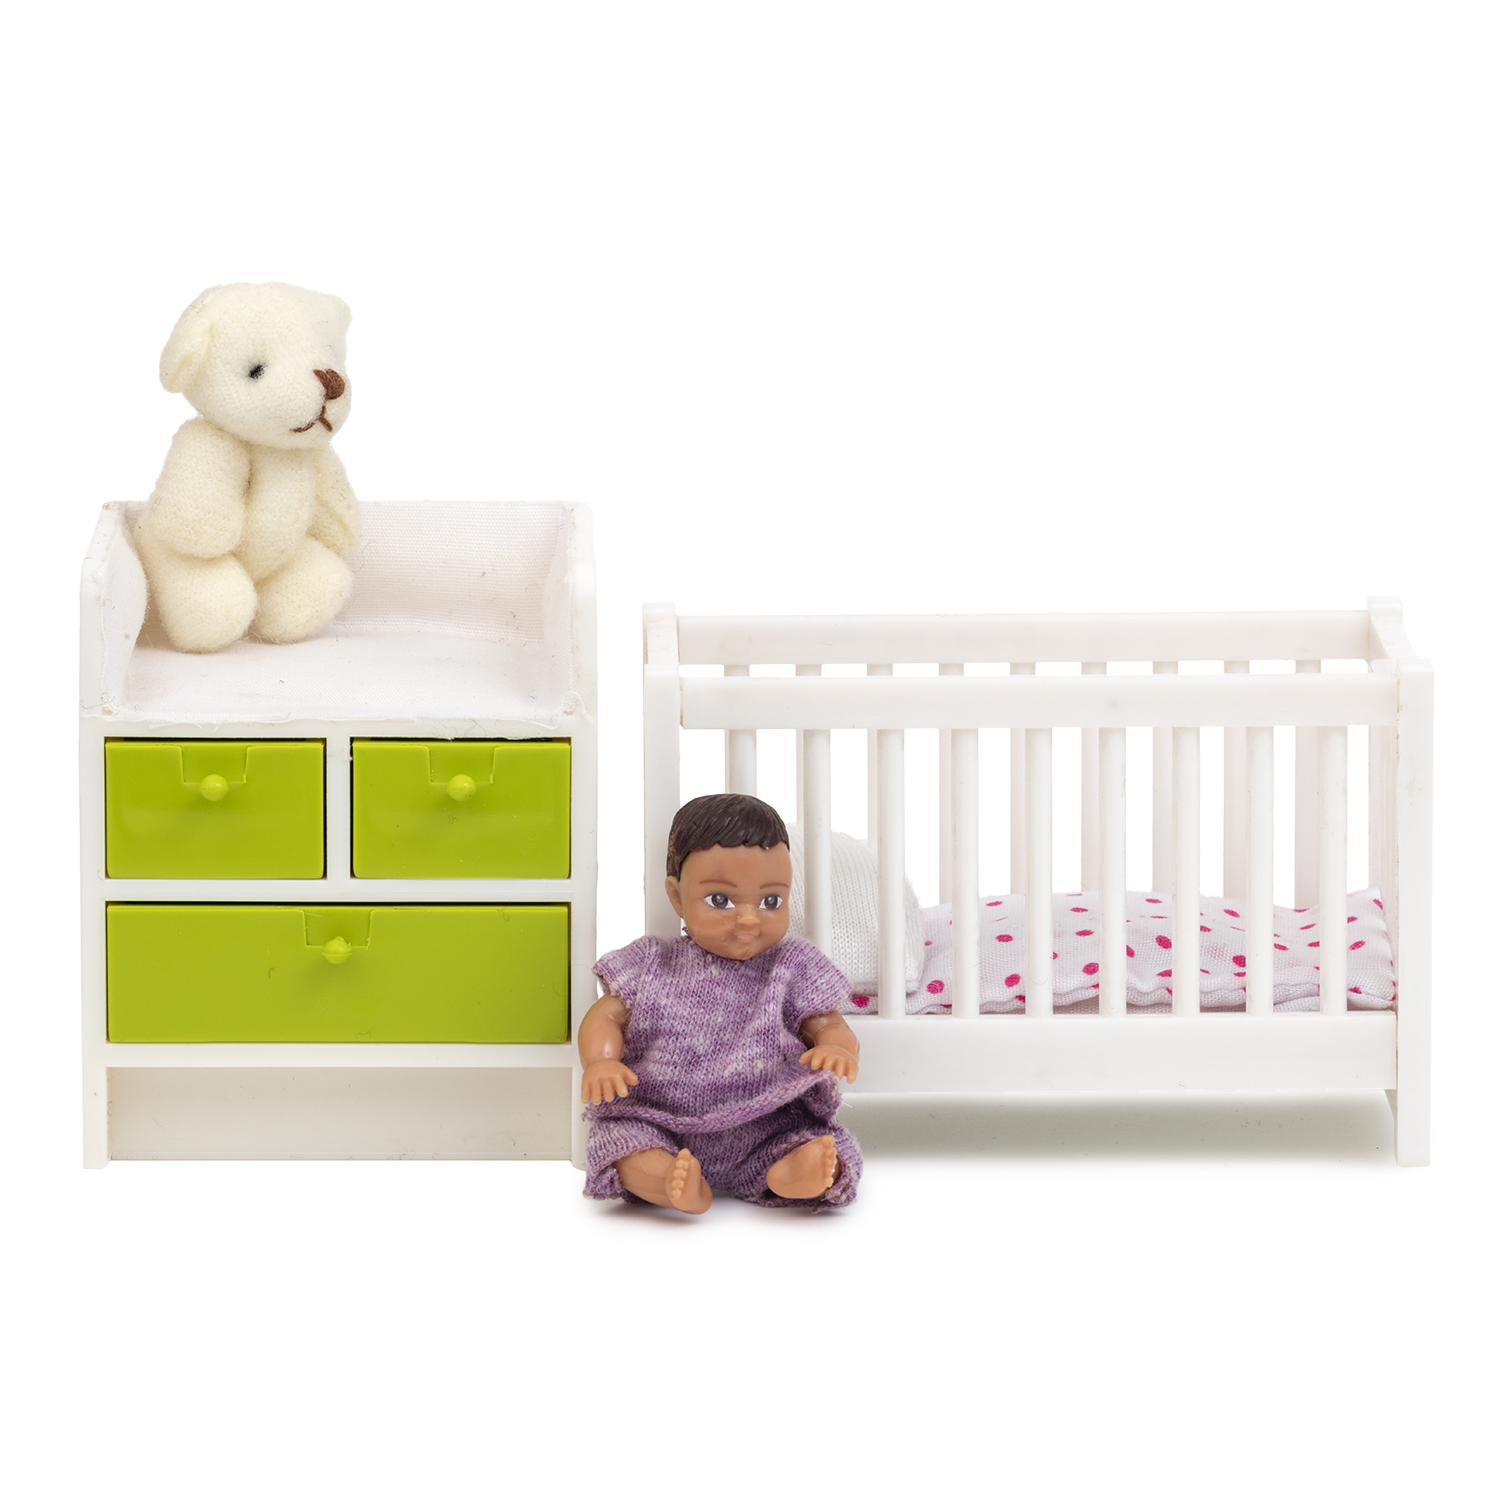 Lundby lundby dollhouse furniture cot & changing table